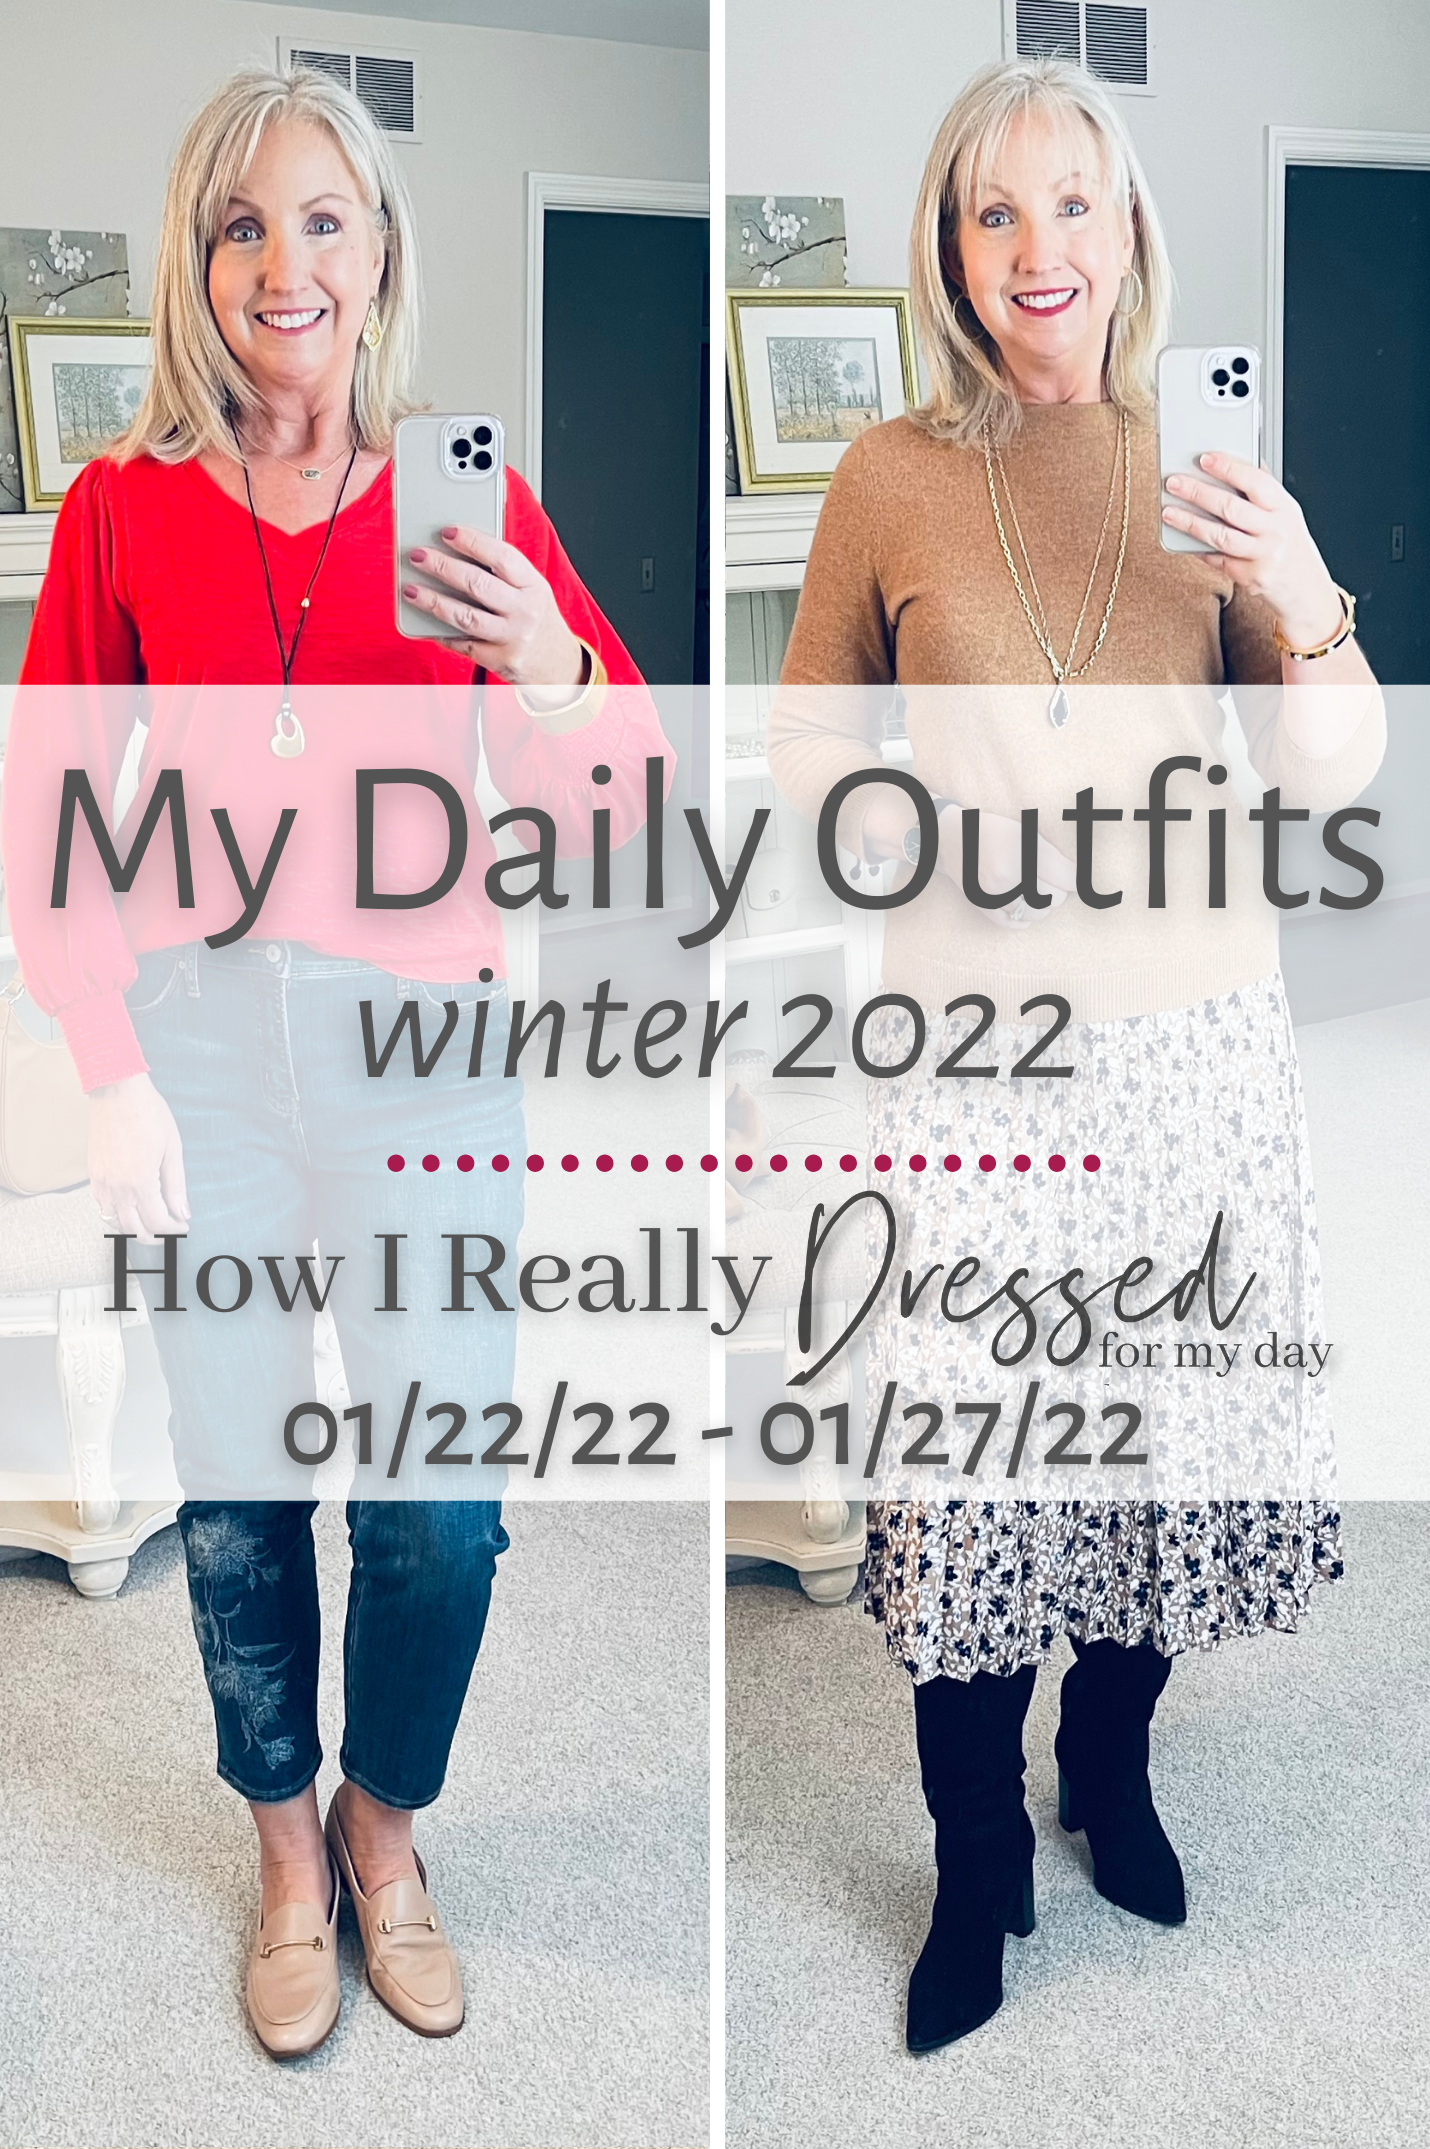 My Daily Outfits for a Cold Winter Week